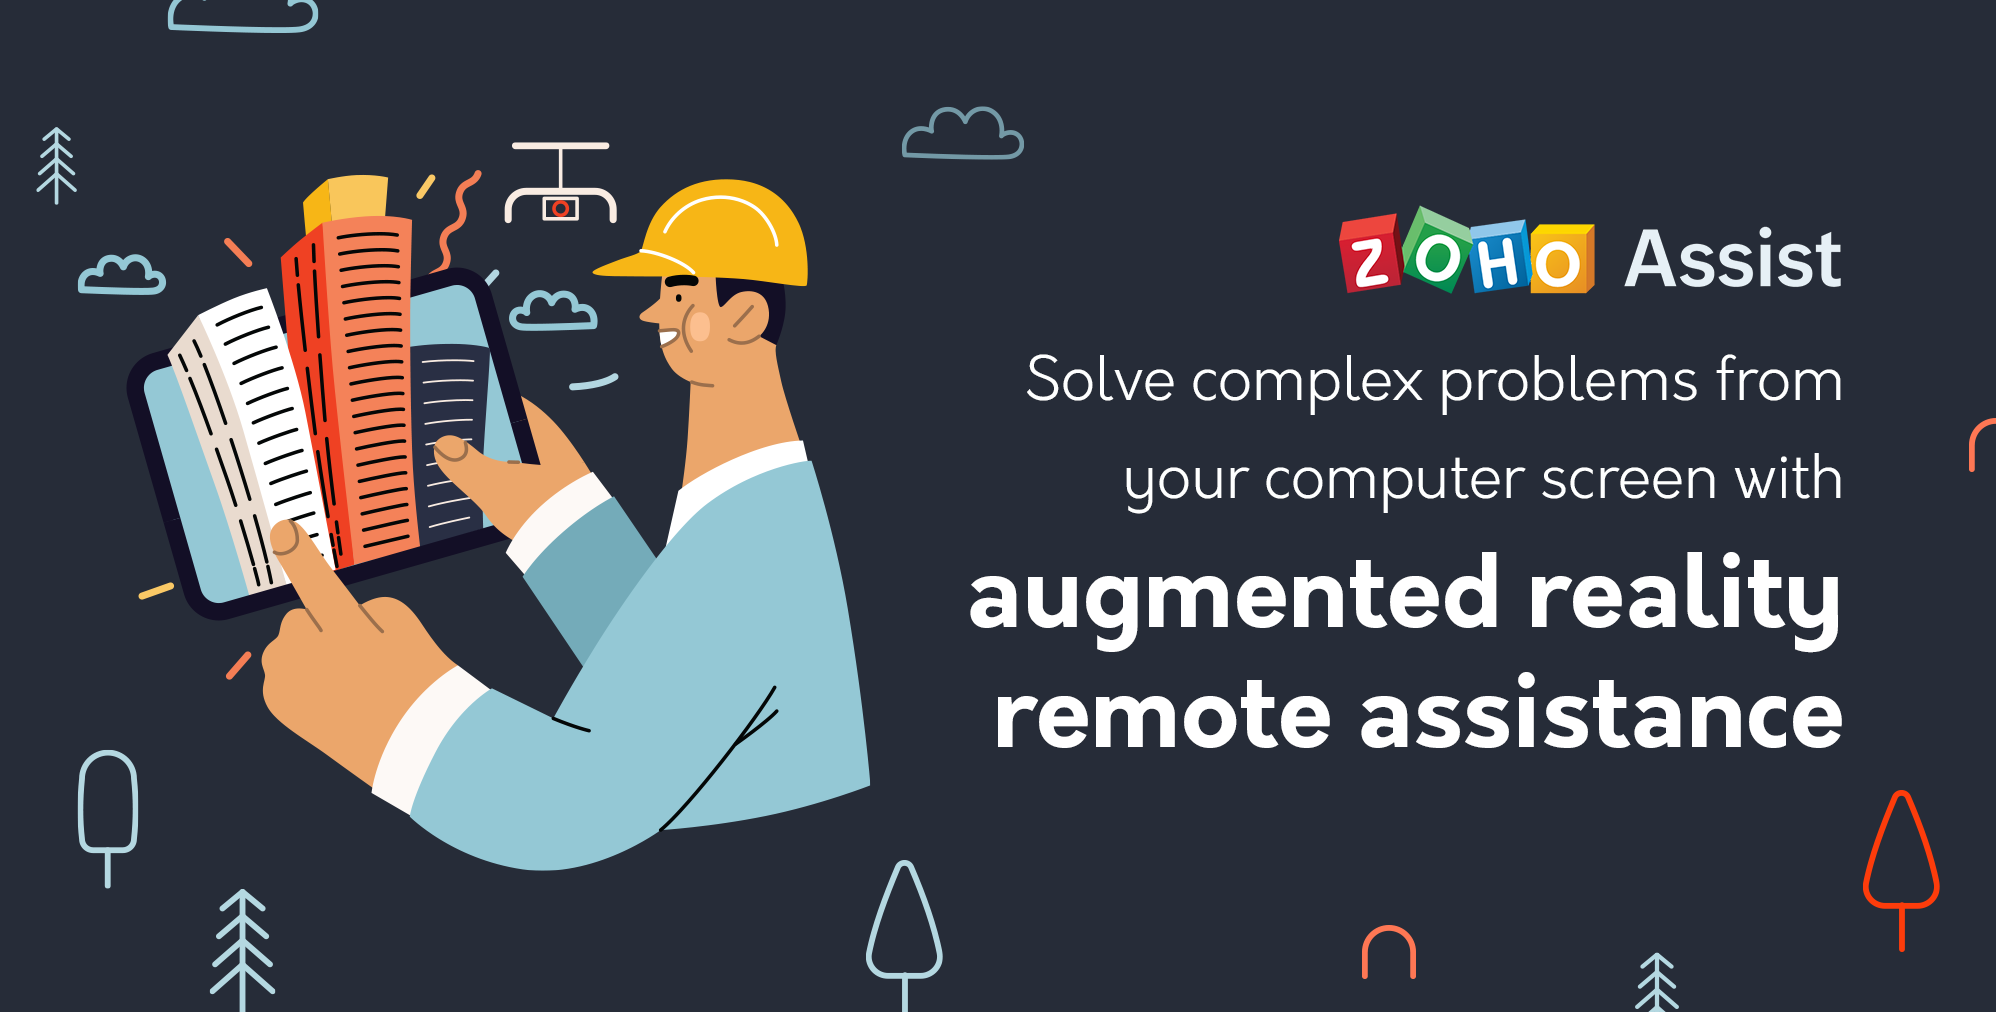 Extend remote support beyond your computer screen: Introducing augmented reality remote assistance! - Zoho Blog